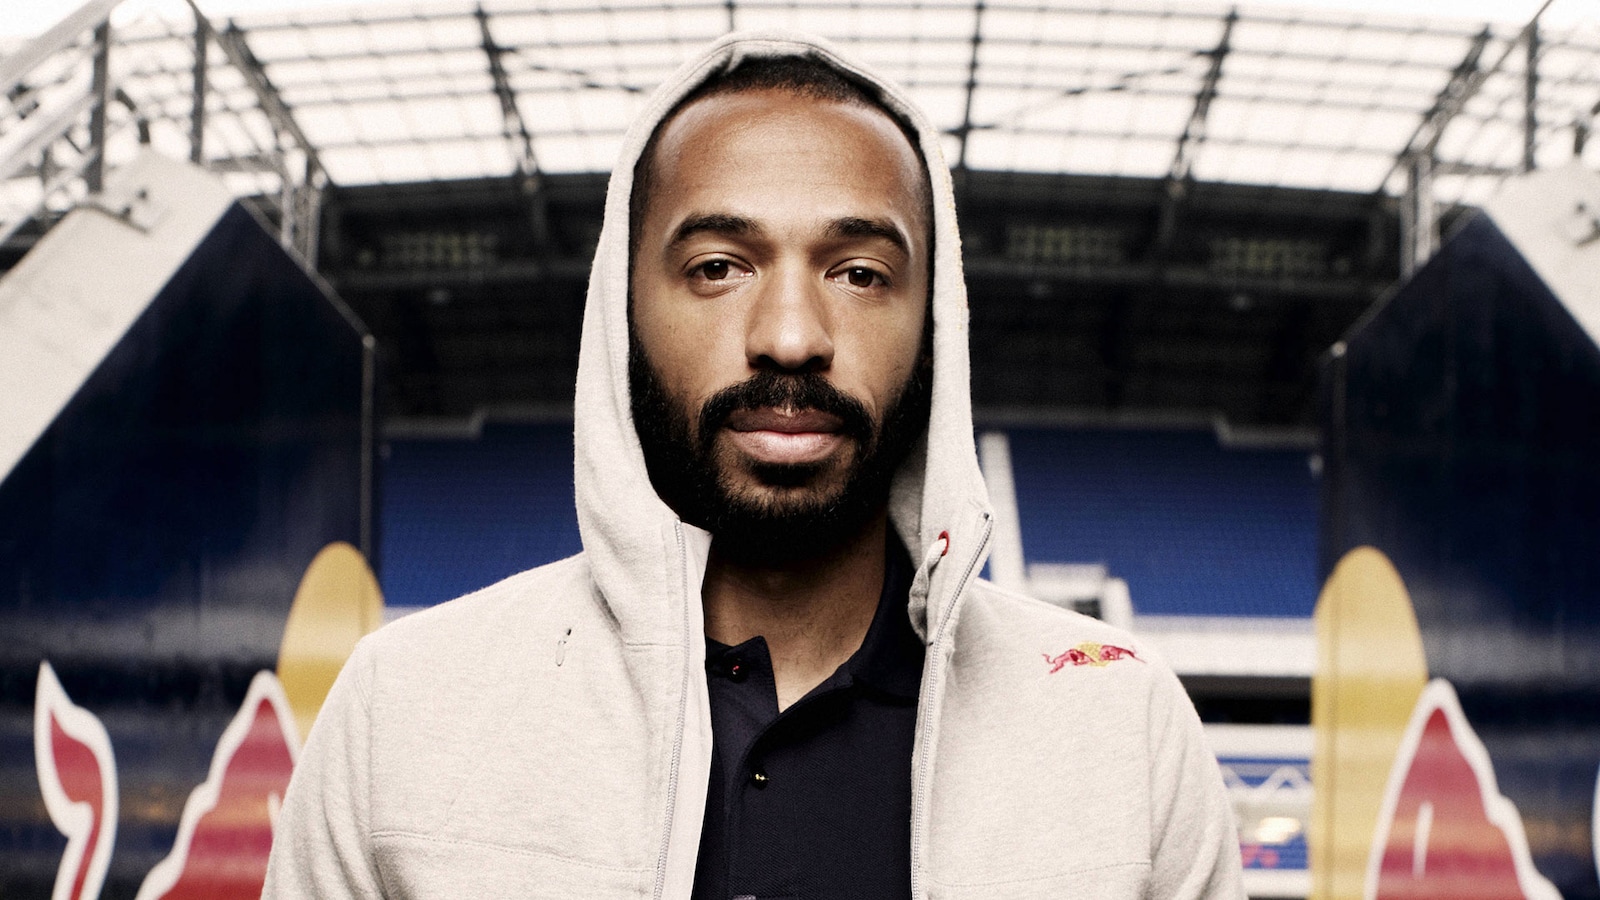 11-thierry-henry-2011